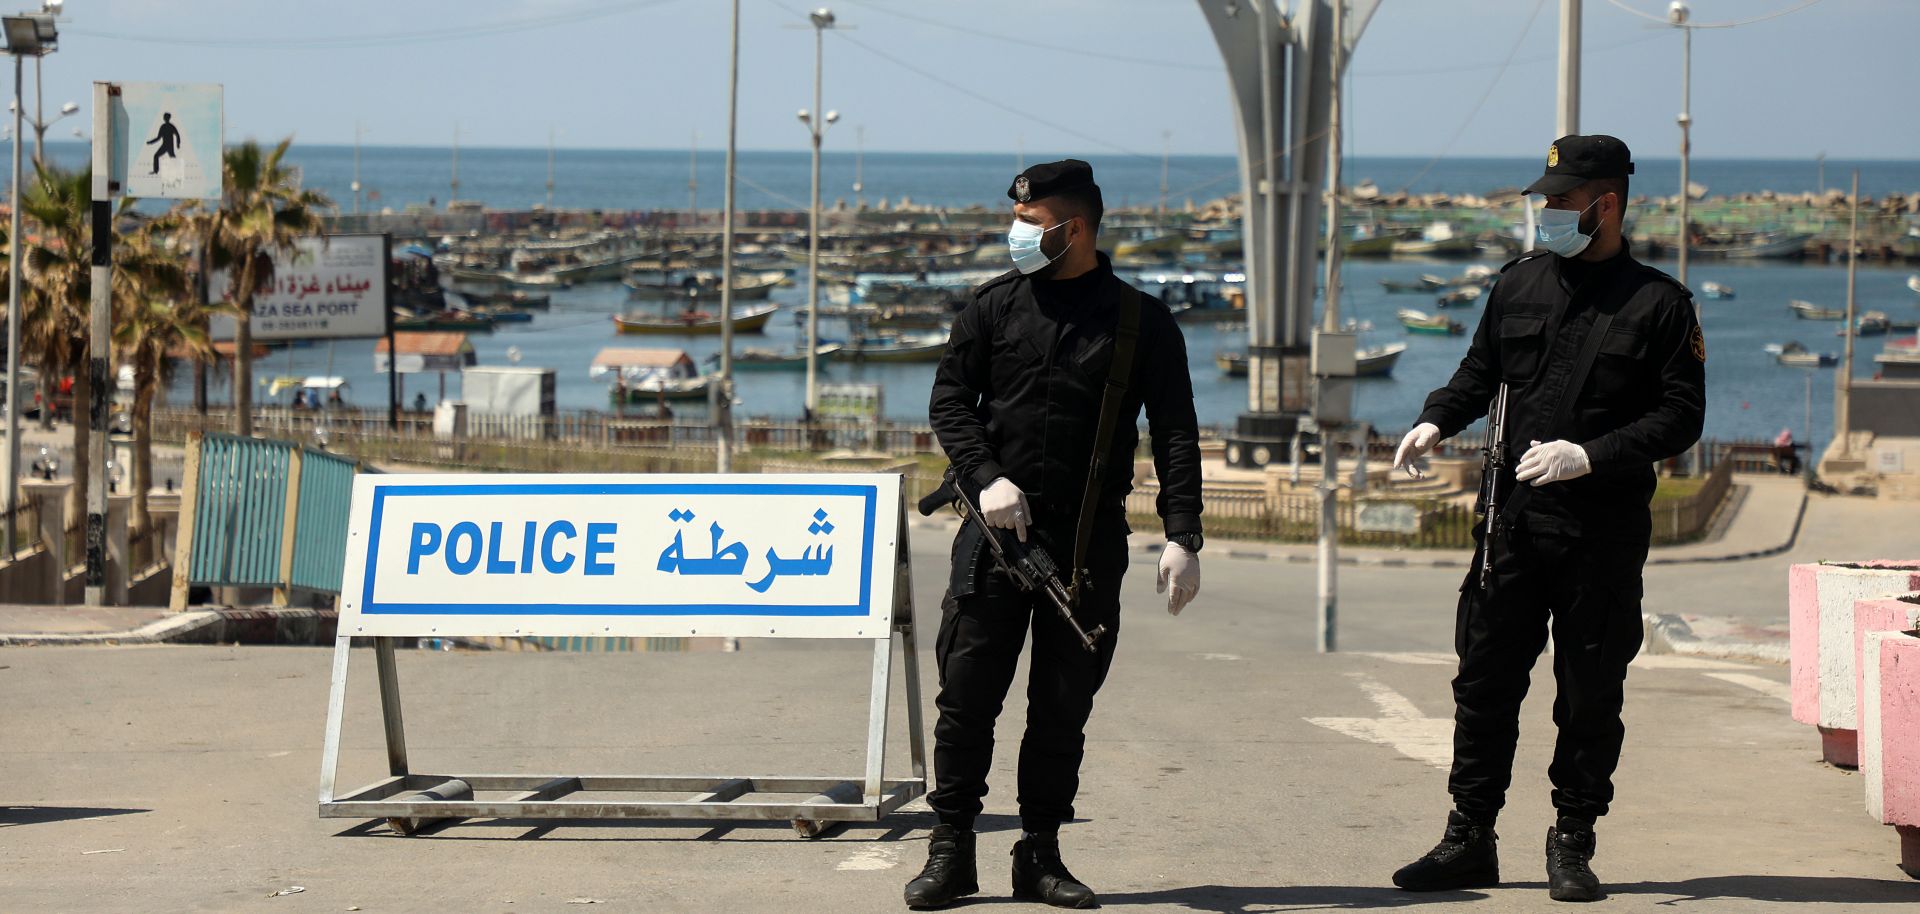 Security forces loyal to Hamas wear face masks while they guard the entrance to the seaport in Gaza City on March 25, 2020. The Palestinian city in the Gaza Strip has been on lockdown to stem the spread of COVID-19.